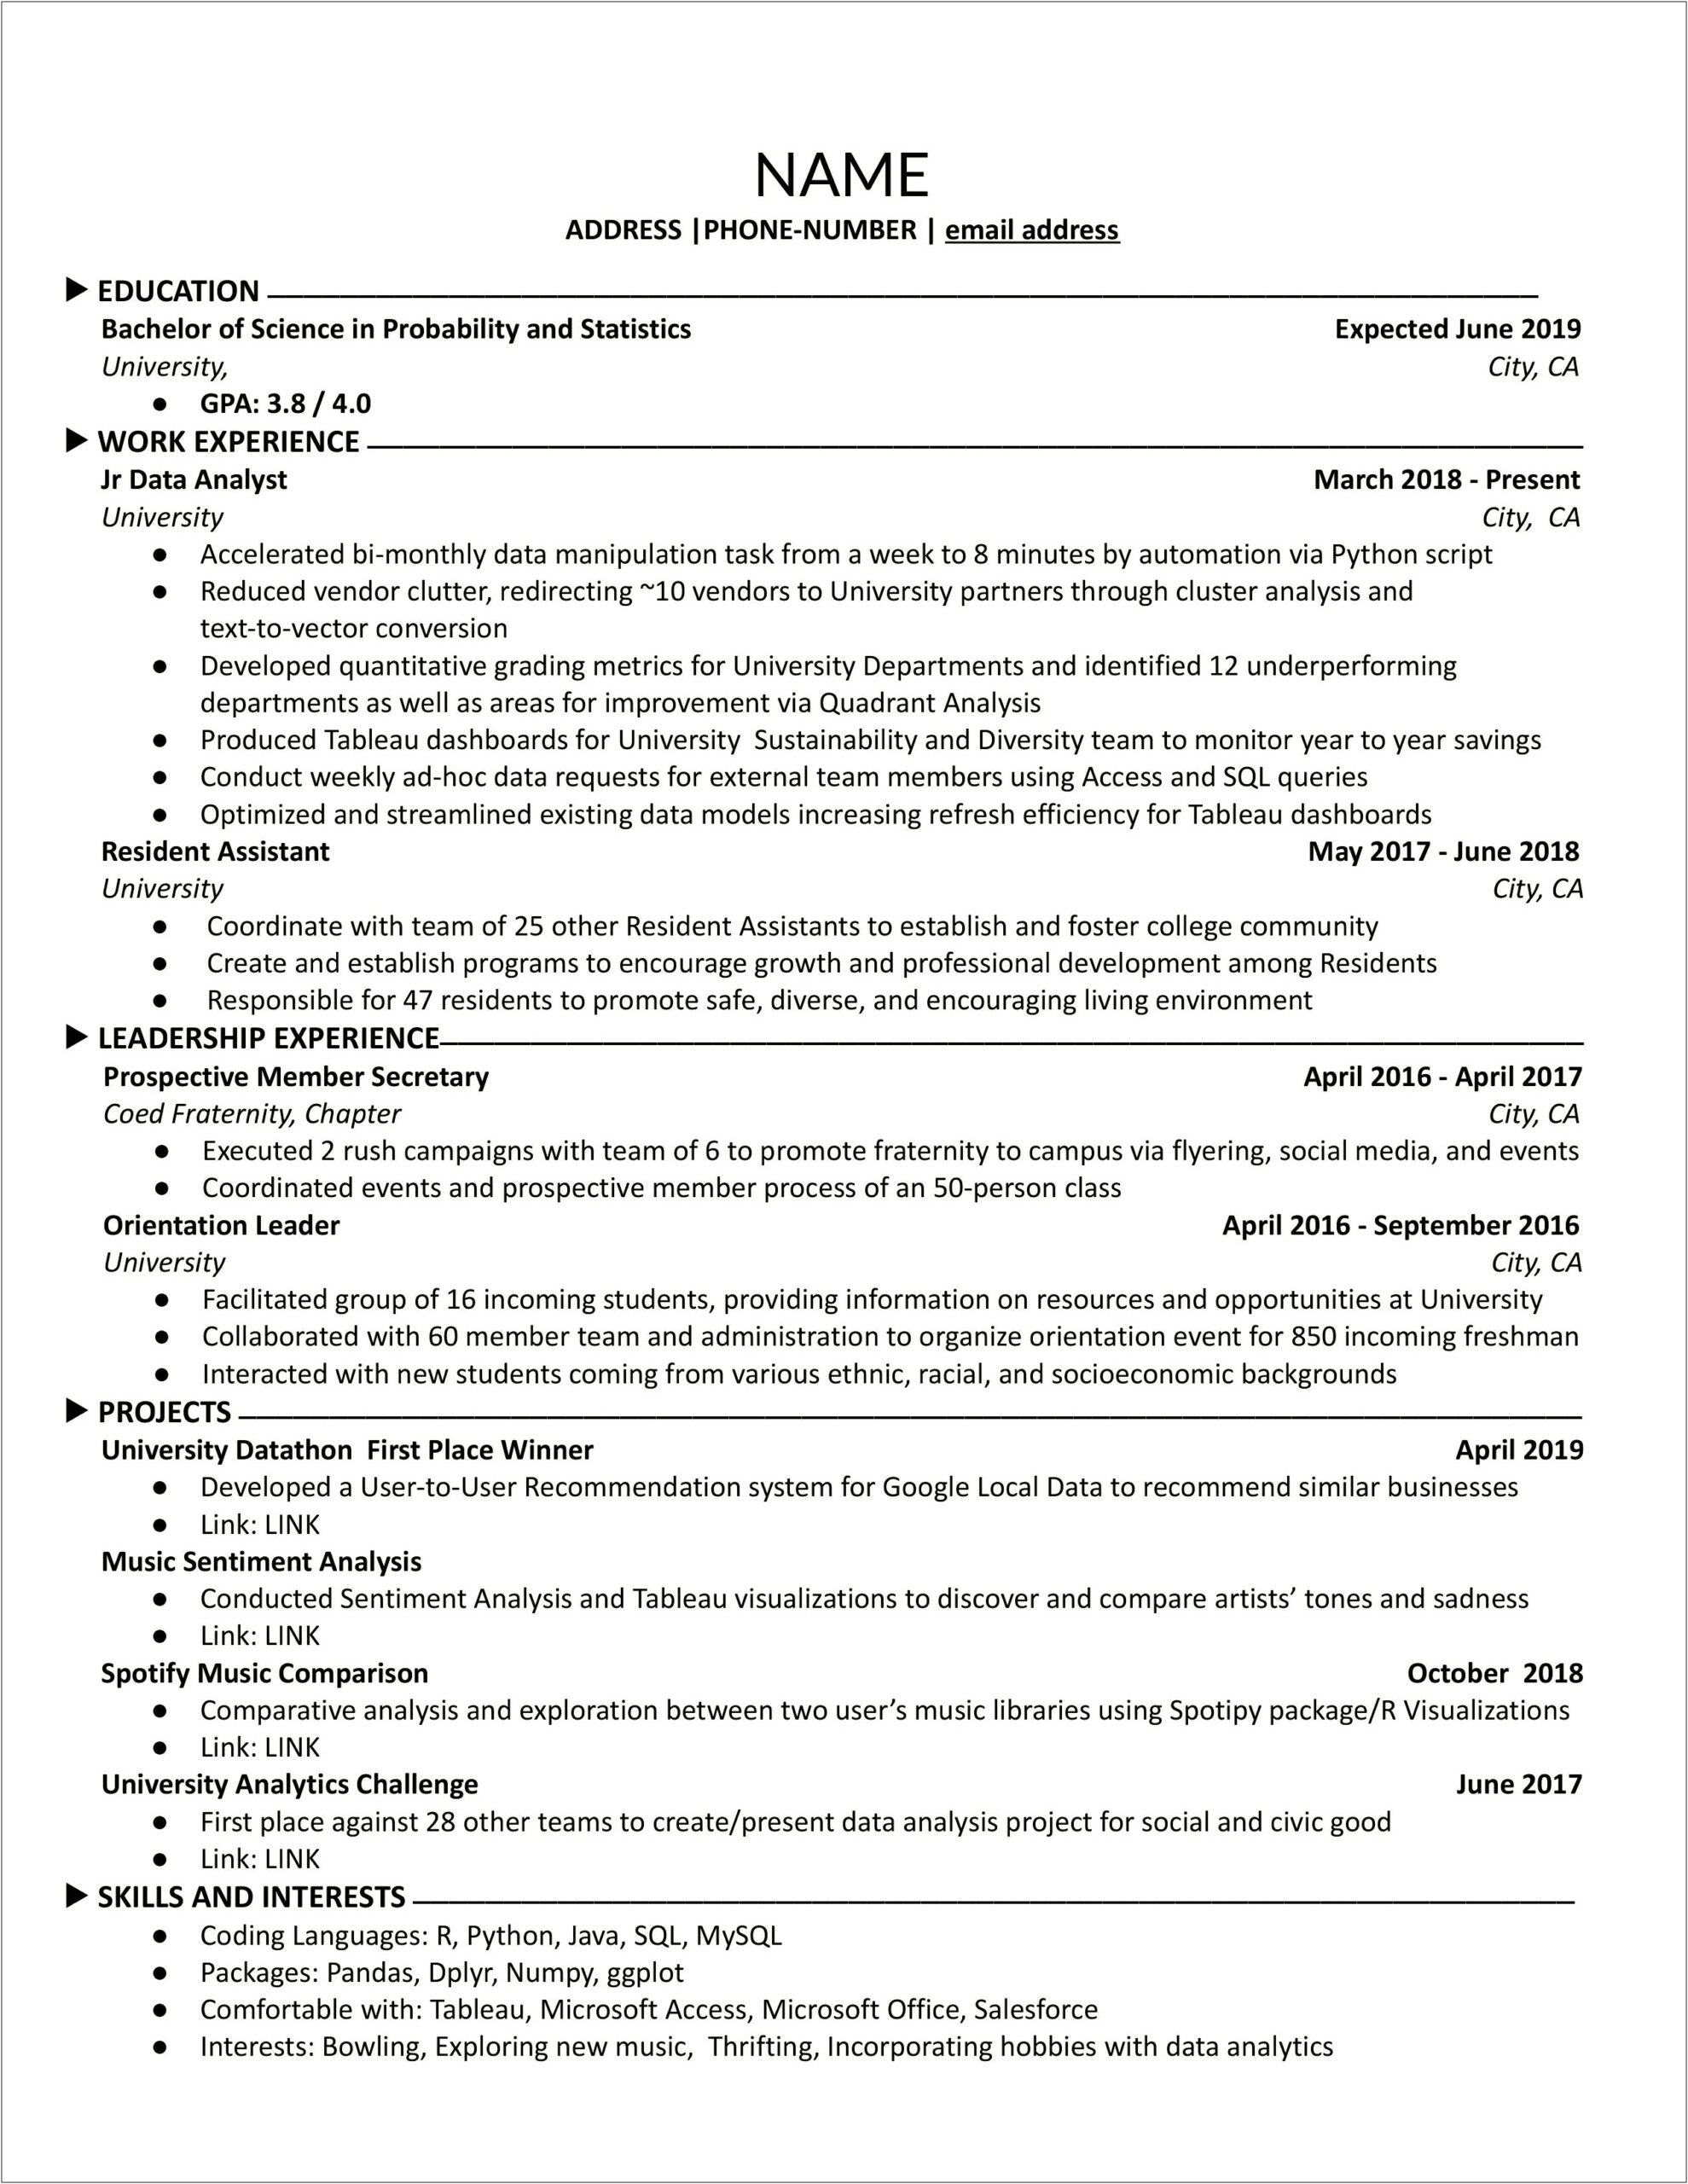 Example Resume For Data Analyst